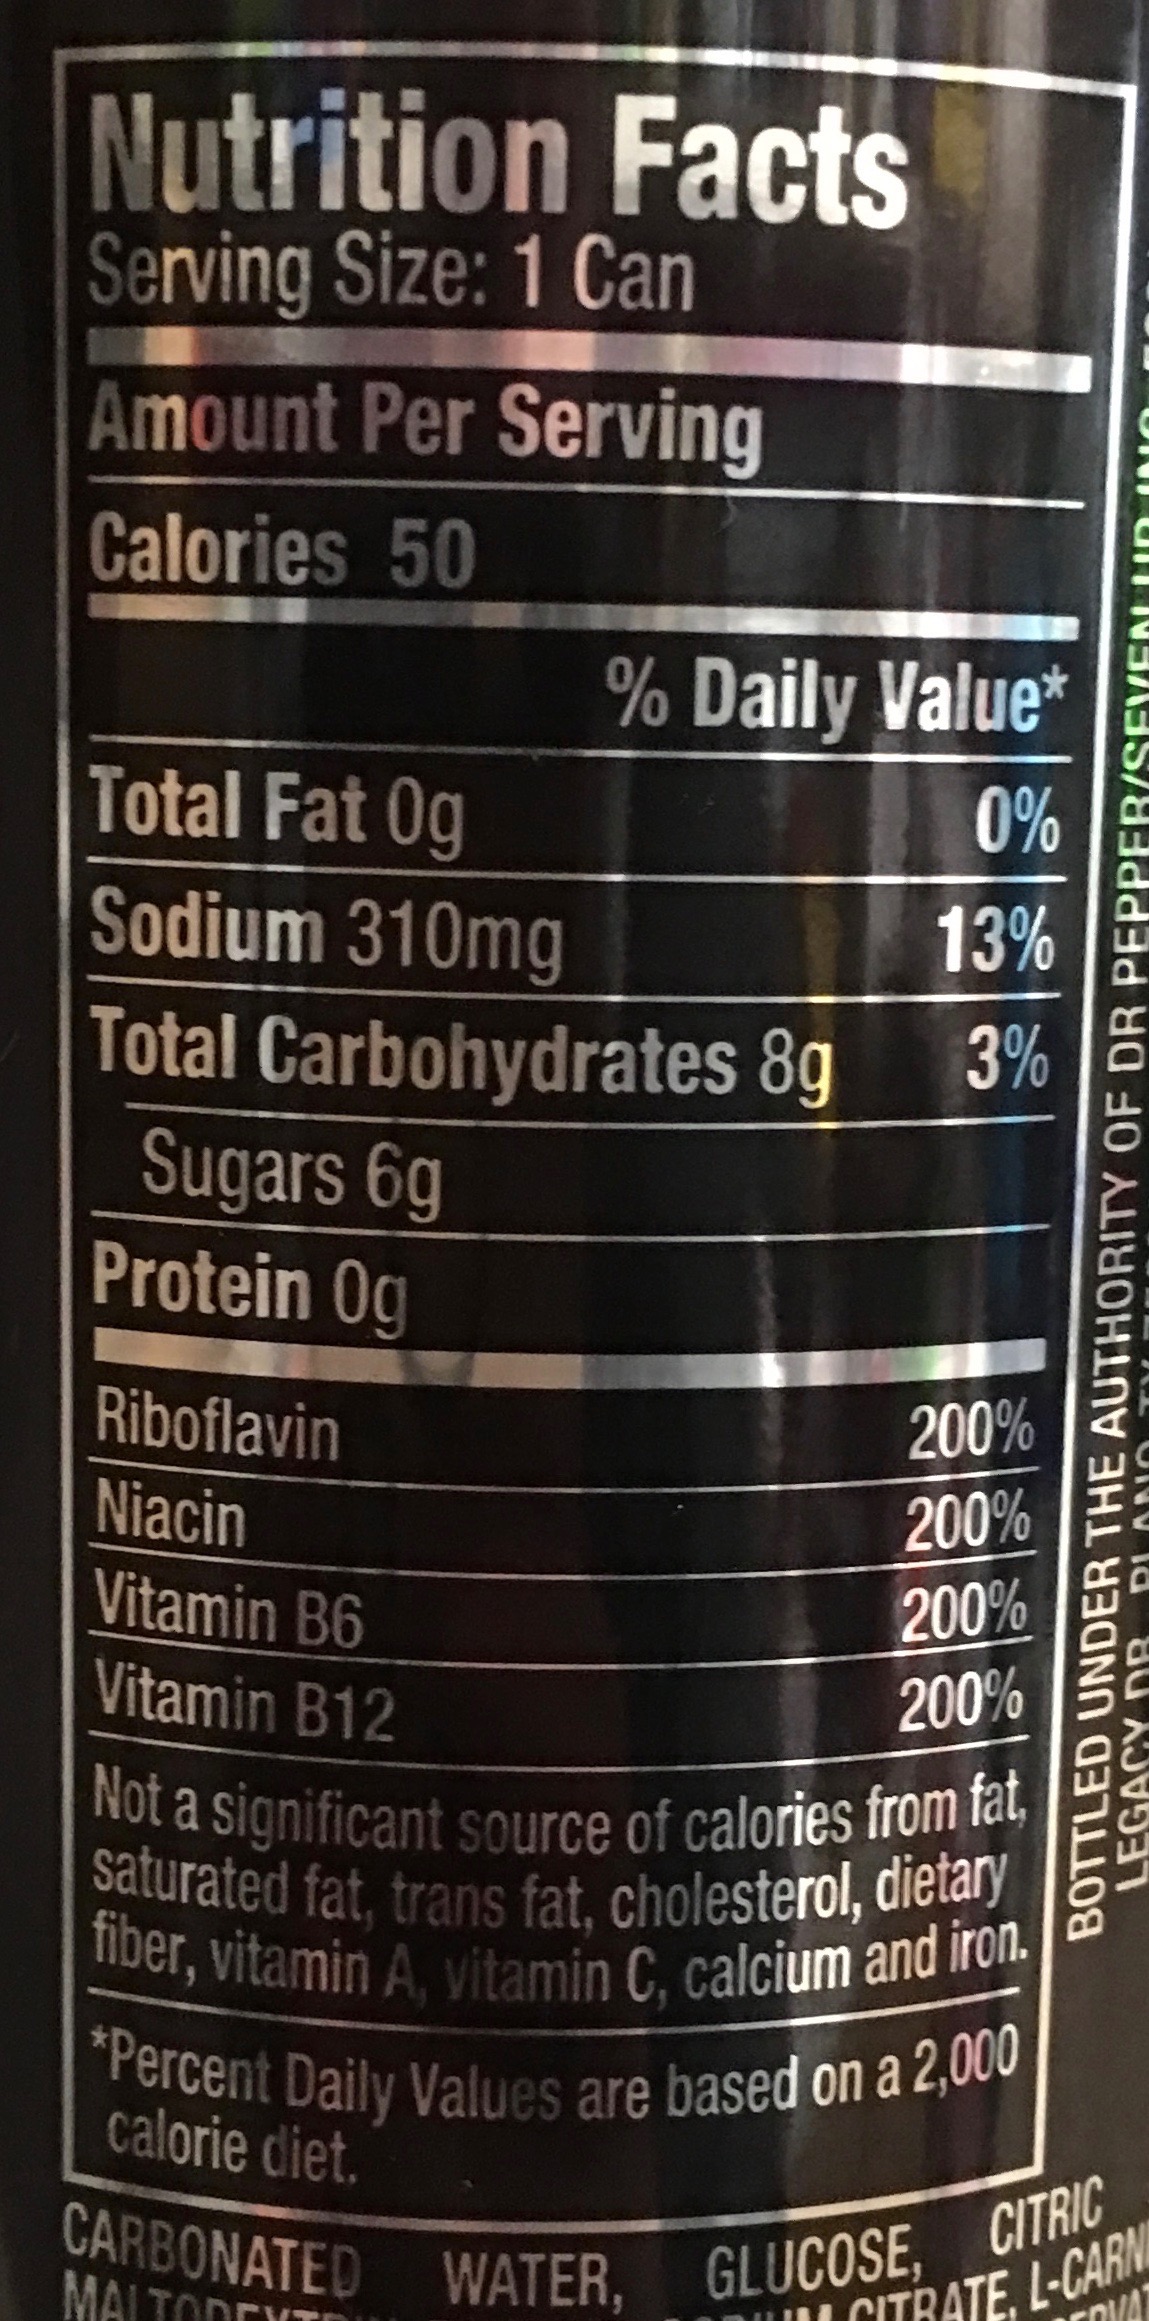 download full throttle energy drink nutrition facts